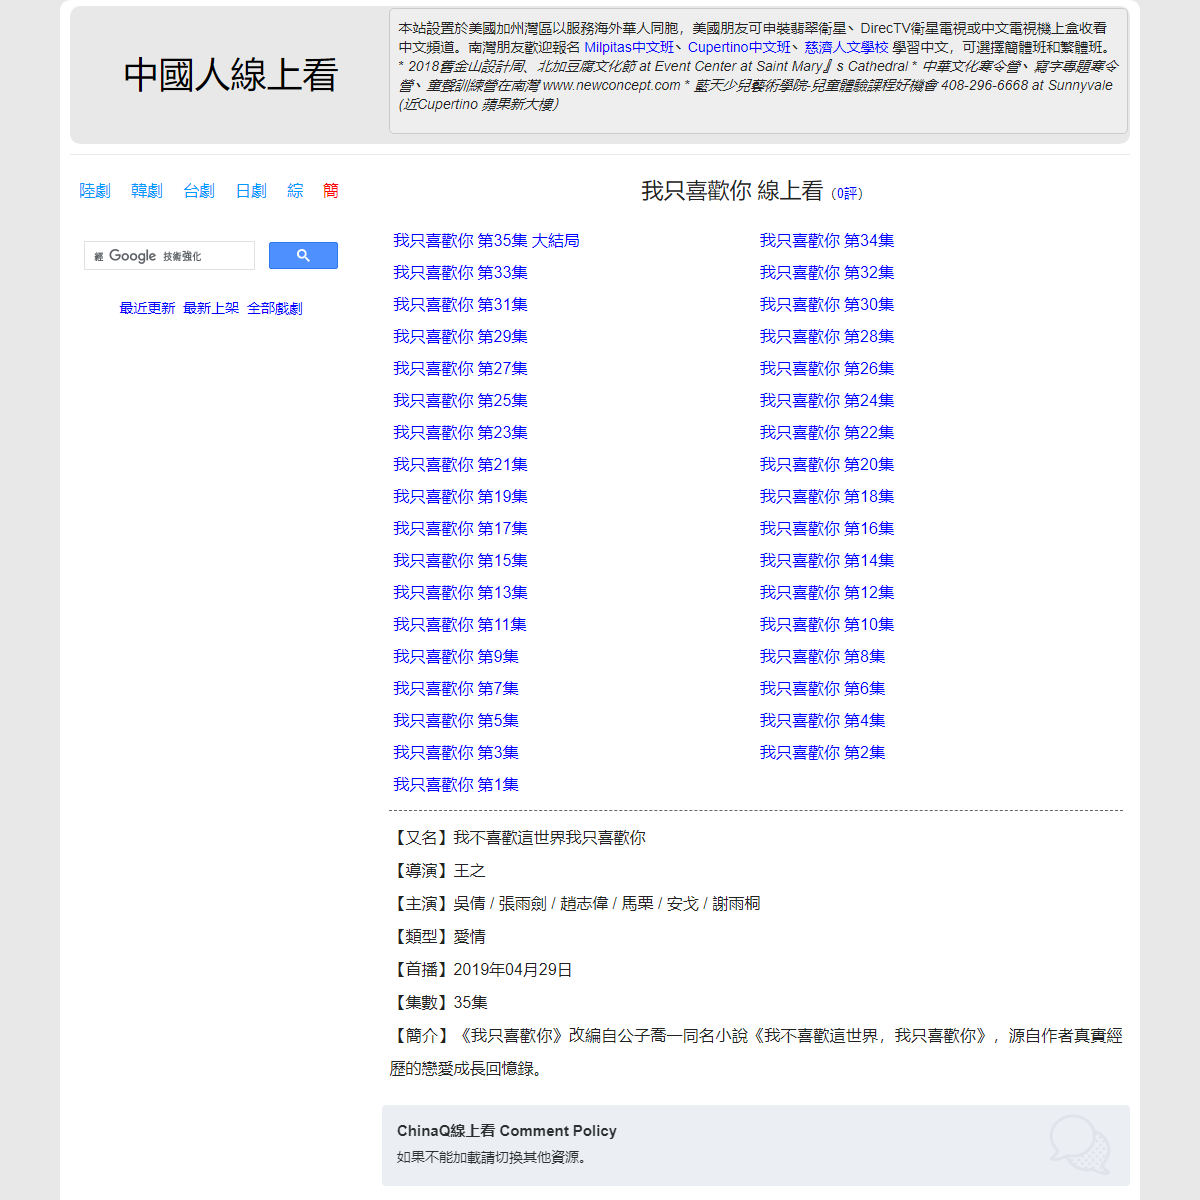 A complete backup of https://chinaq.tv/cn190429d/